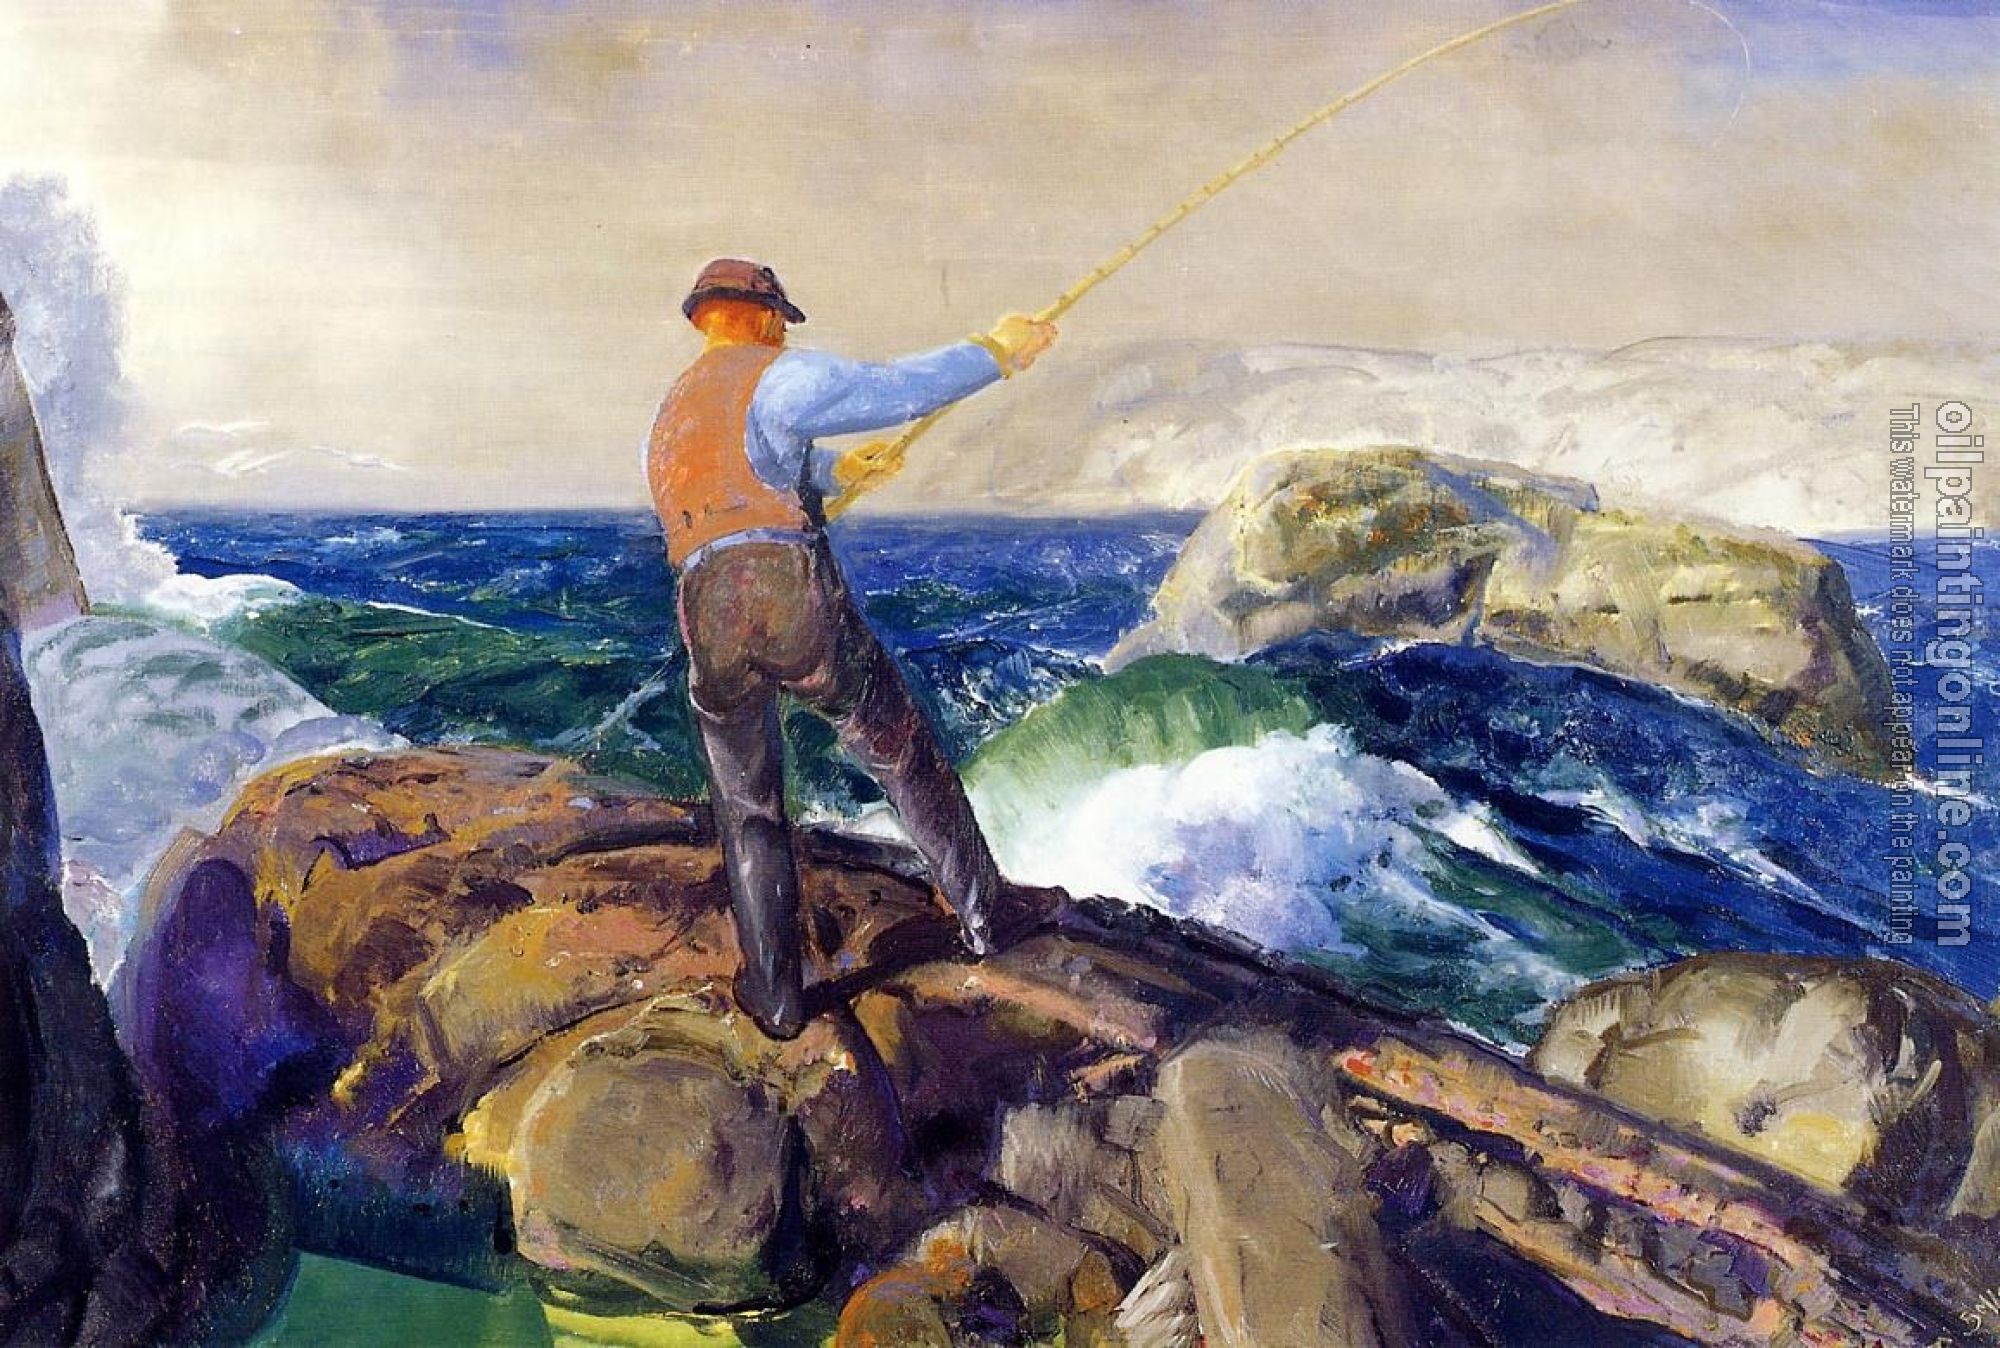 Bellows, George - The Fisherman